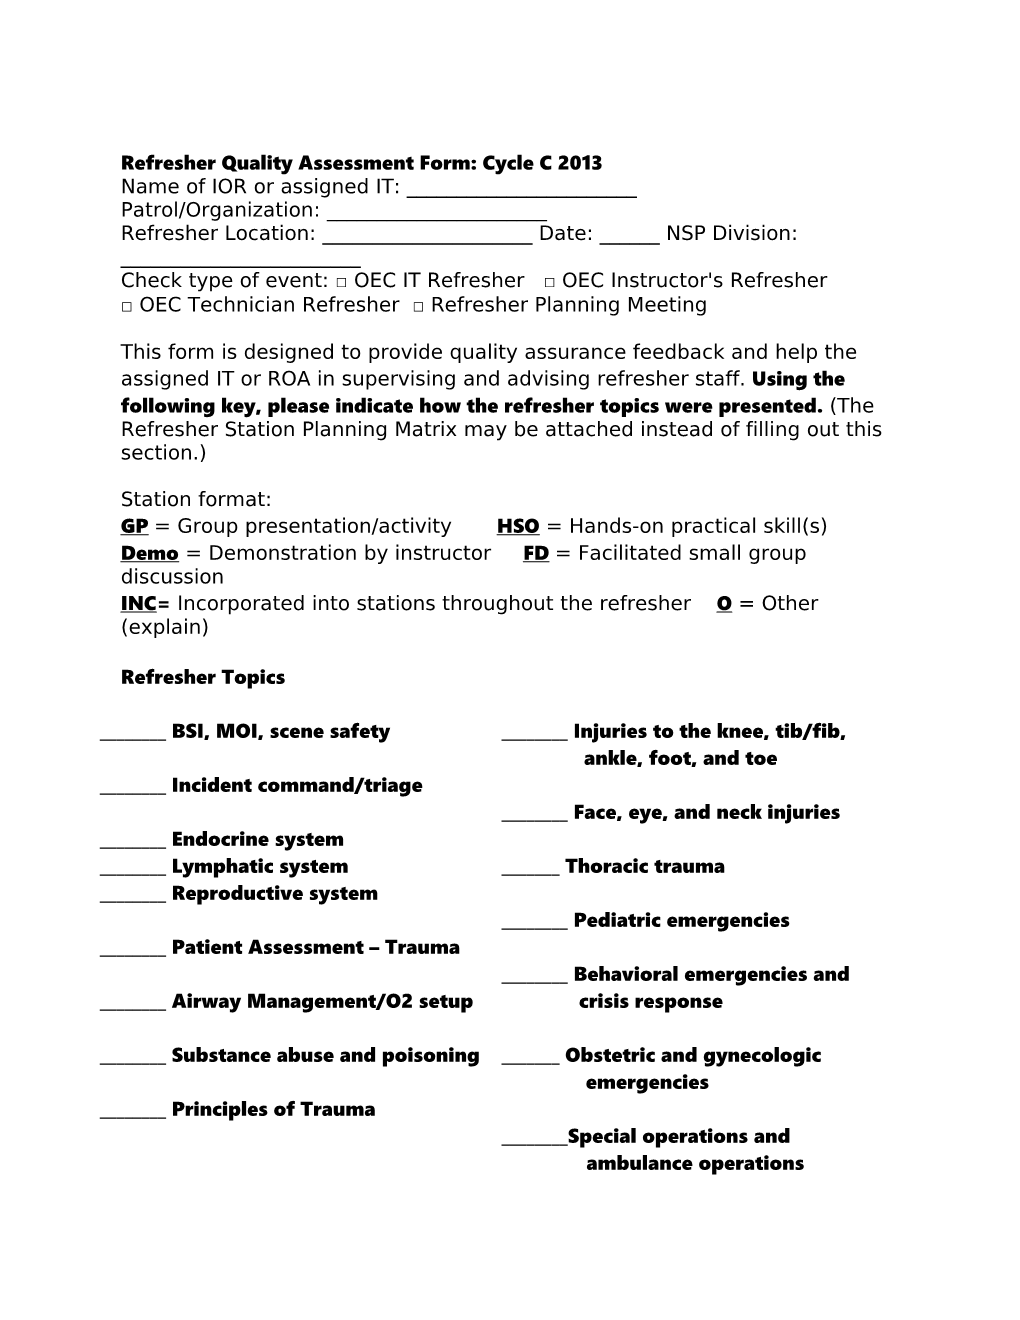 Refresher Quality Assessment Form: Cycle C 2013